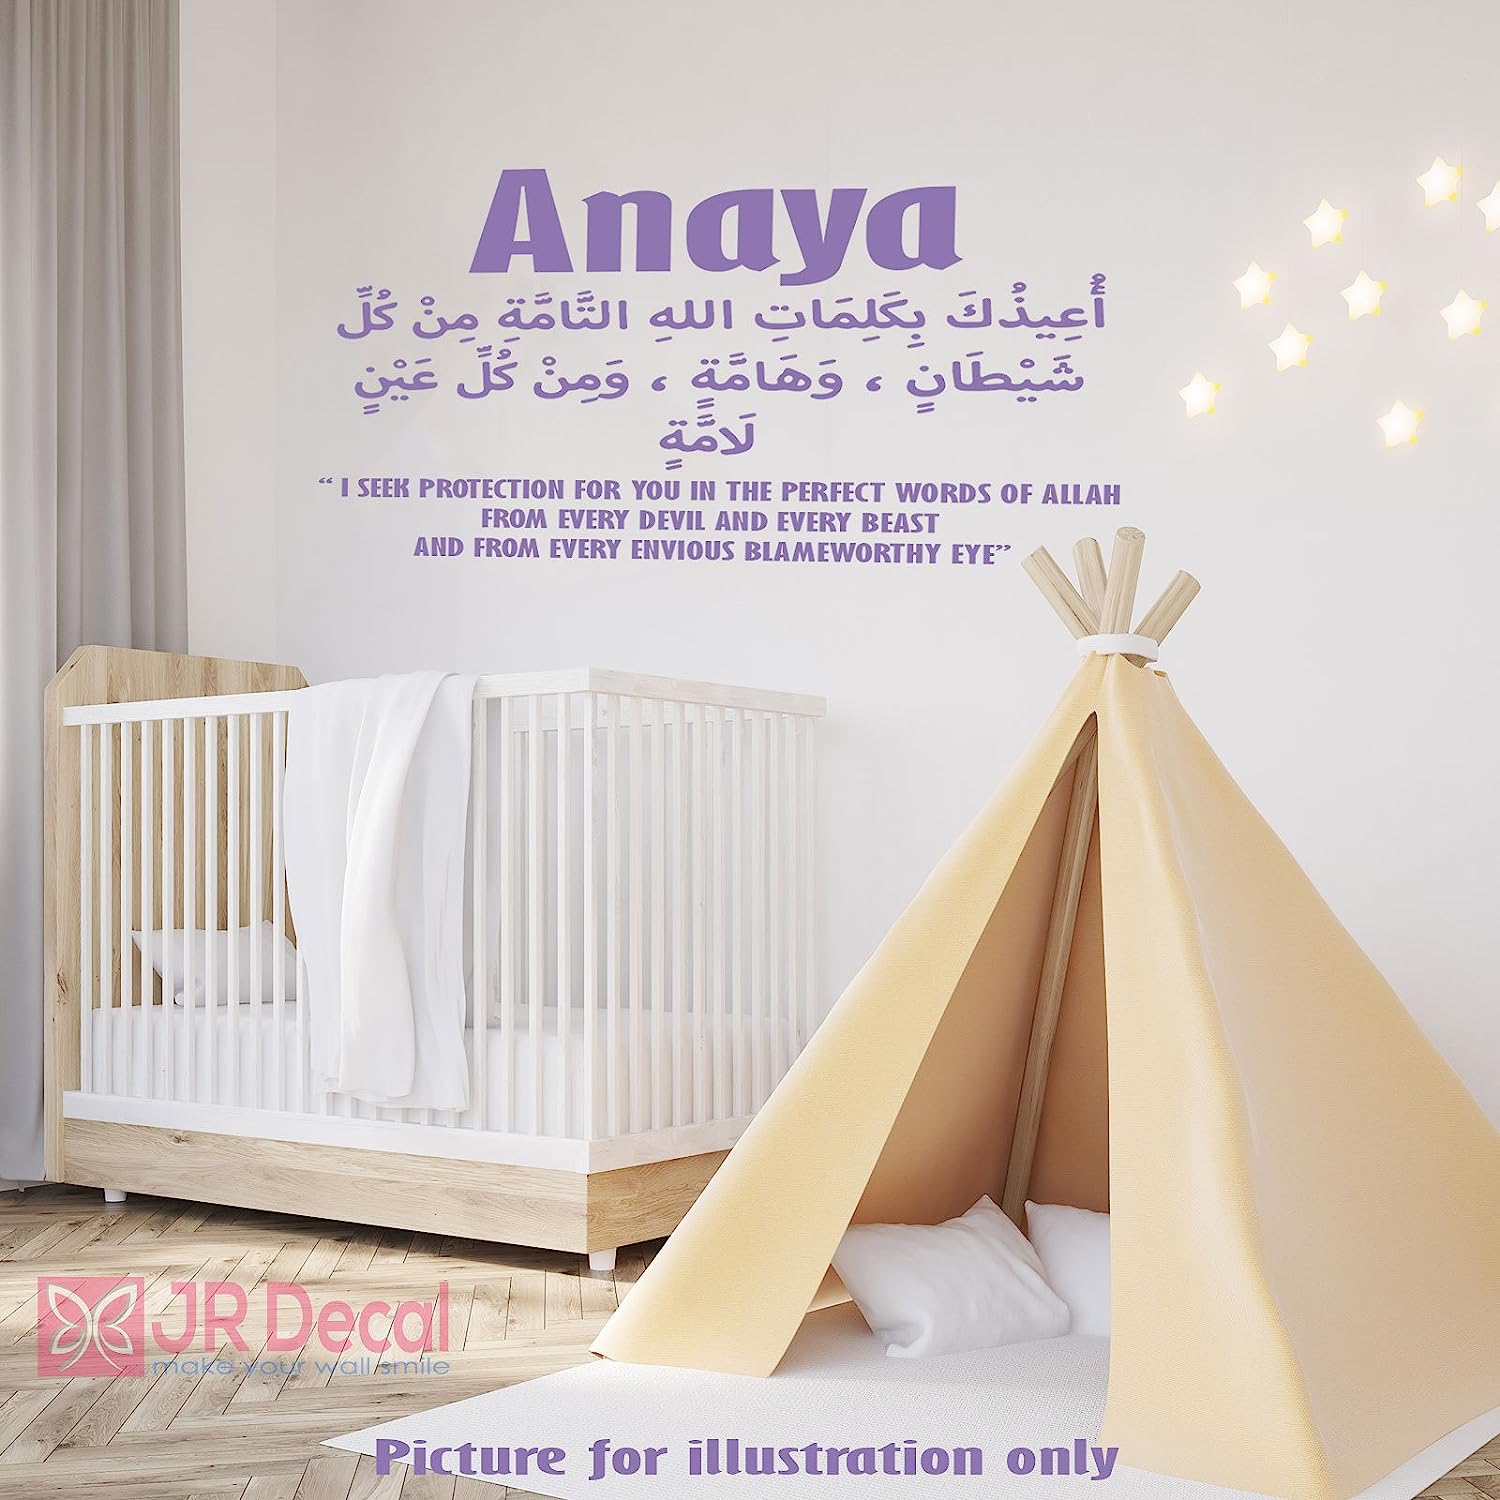 Personalised Name +I seek protection for you in the perfect words of Allah(SWT.) from every devil and beast and - Islamic Quote Muslim Nursery Kid's Room Decor Vinyl Wall Art Stickers Decals …